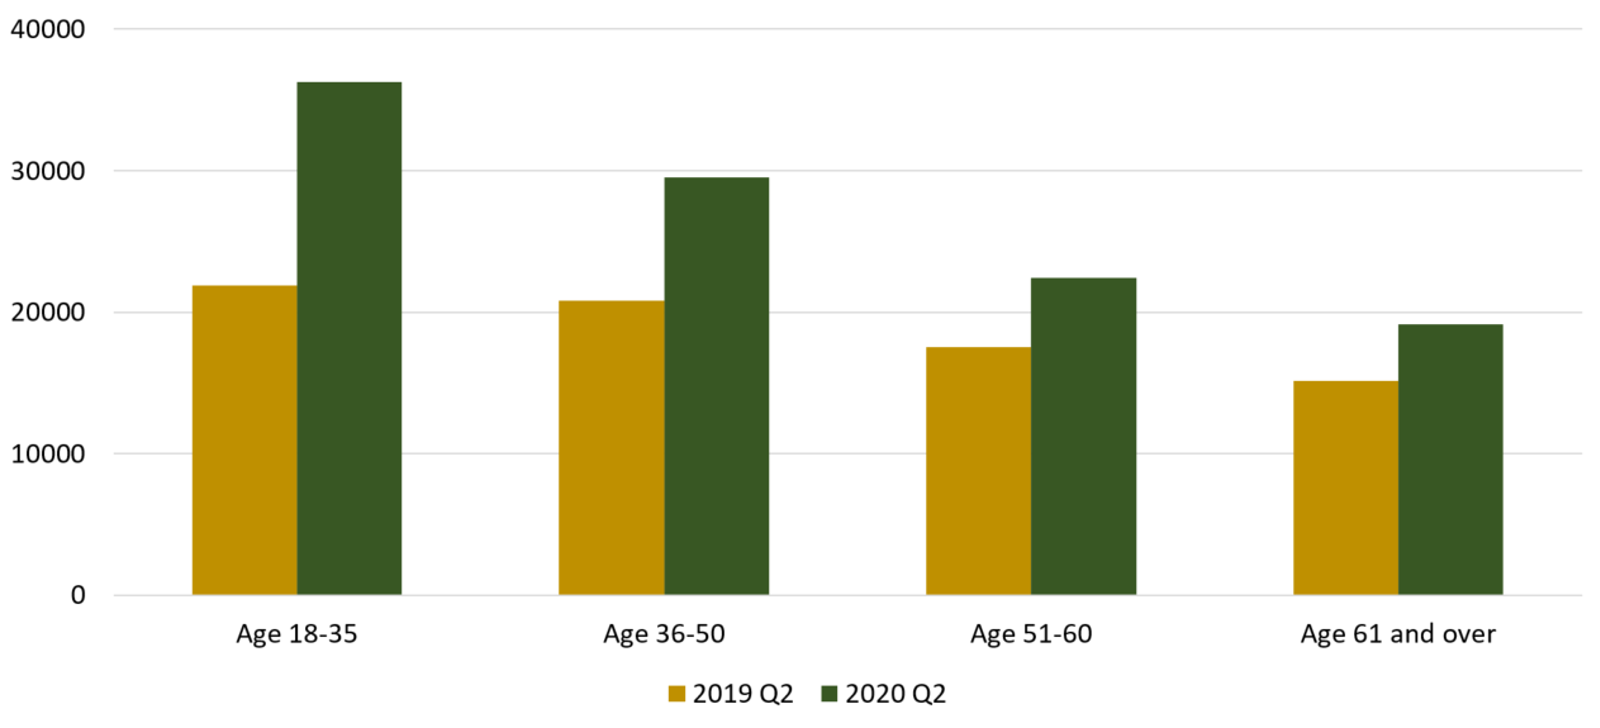 Figure 2: Average mortgage prepayments by age group